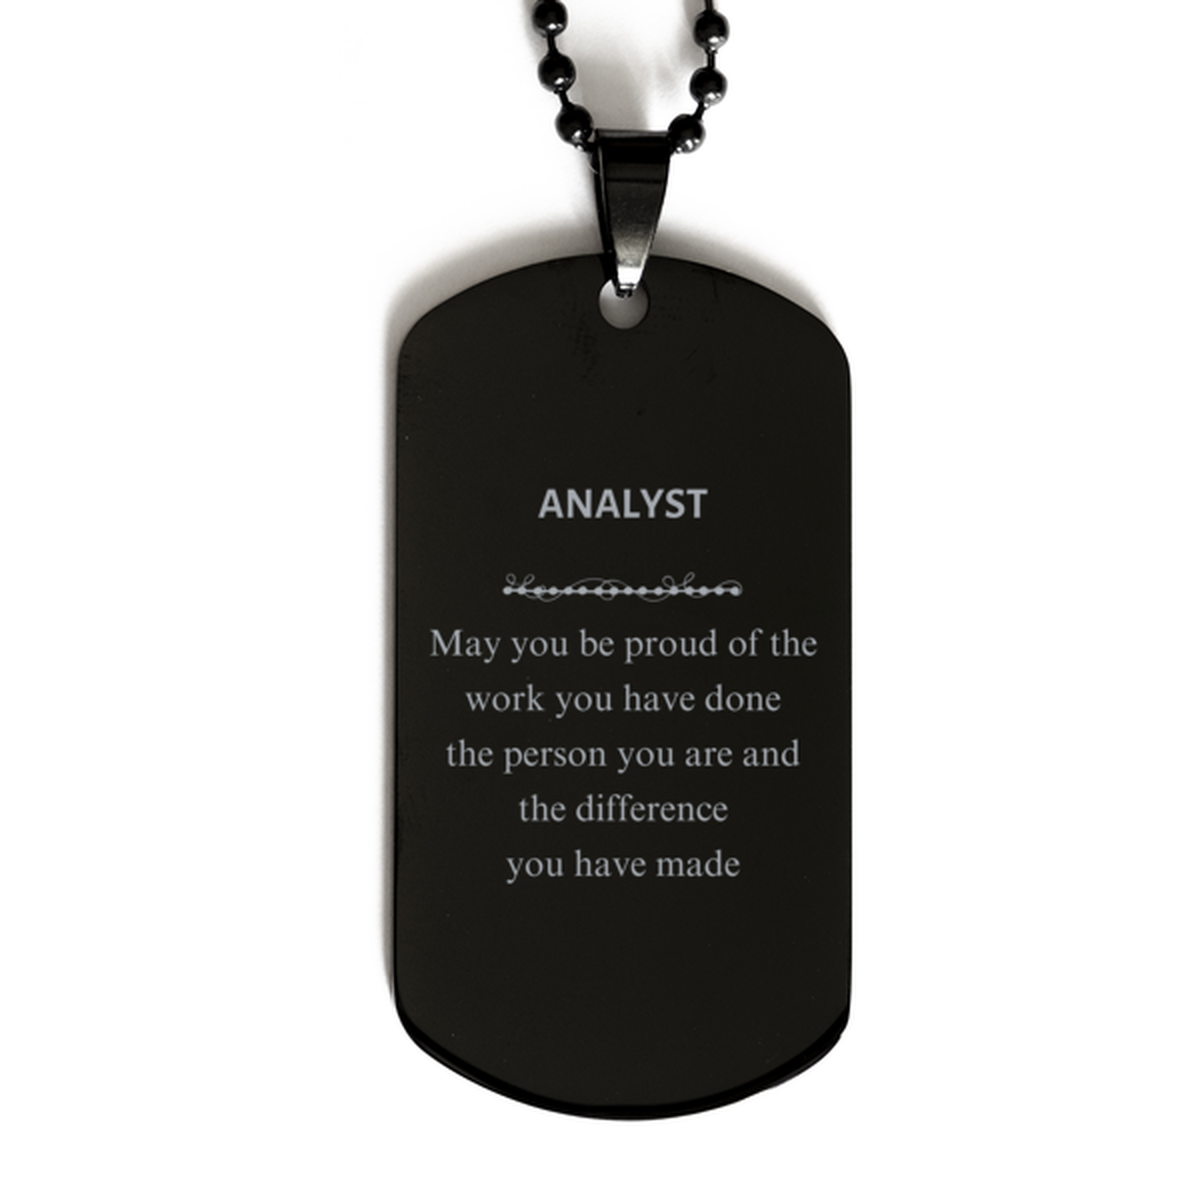 Analyst May you be proud of the work you have done, Retirement Analyst Black Dog Tag for Colleague Appreciation Gifts Amazing for Analyst